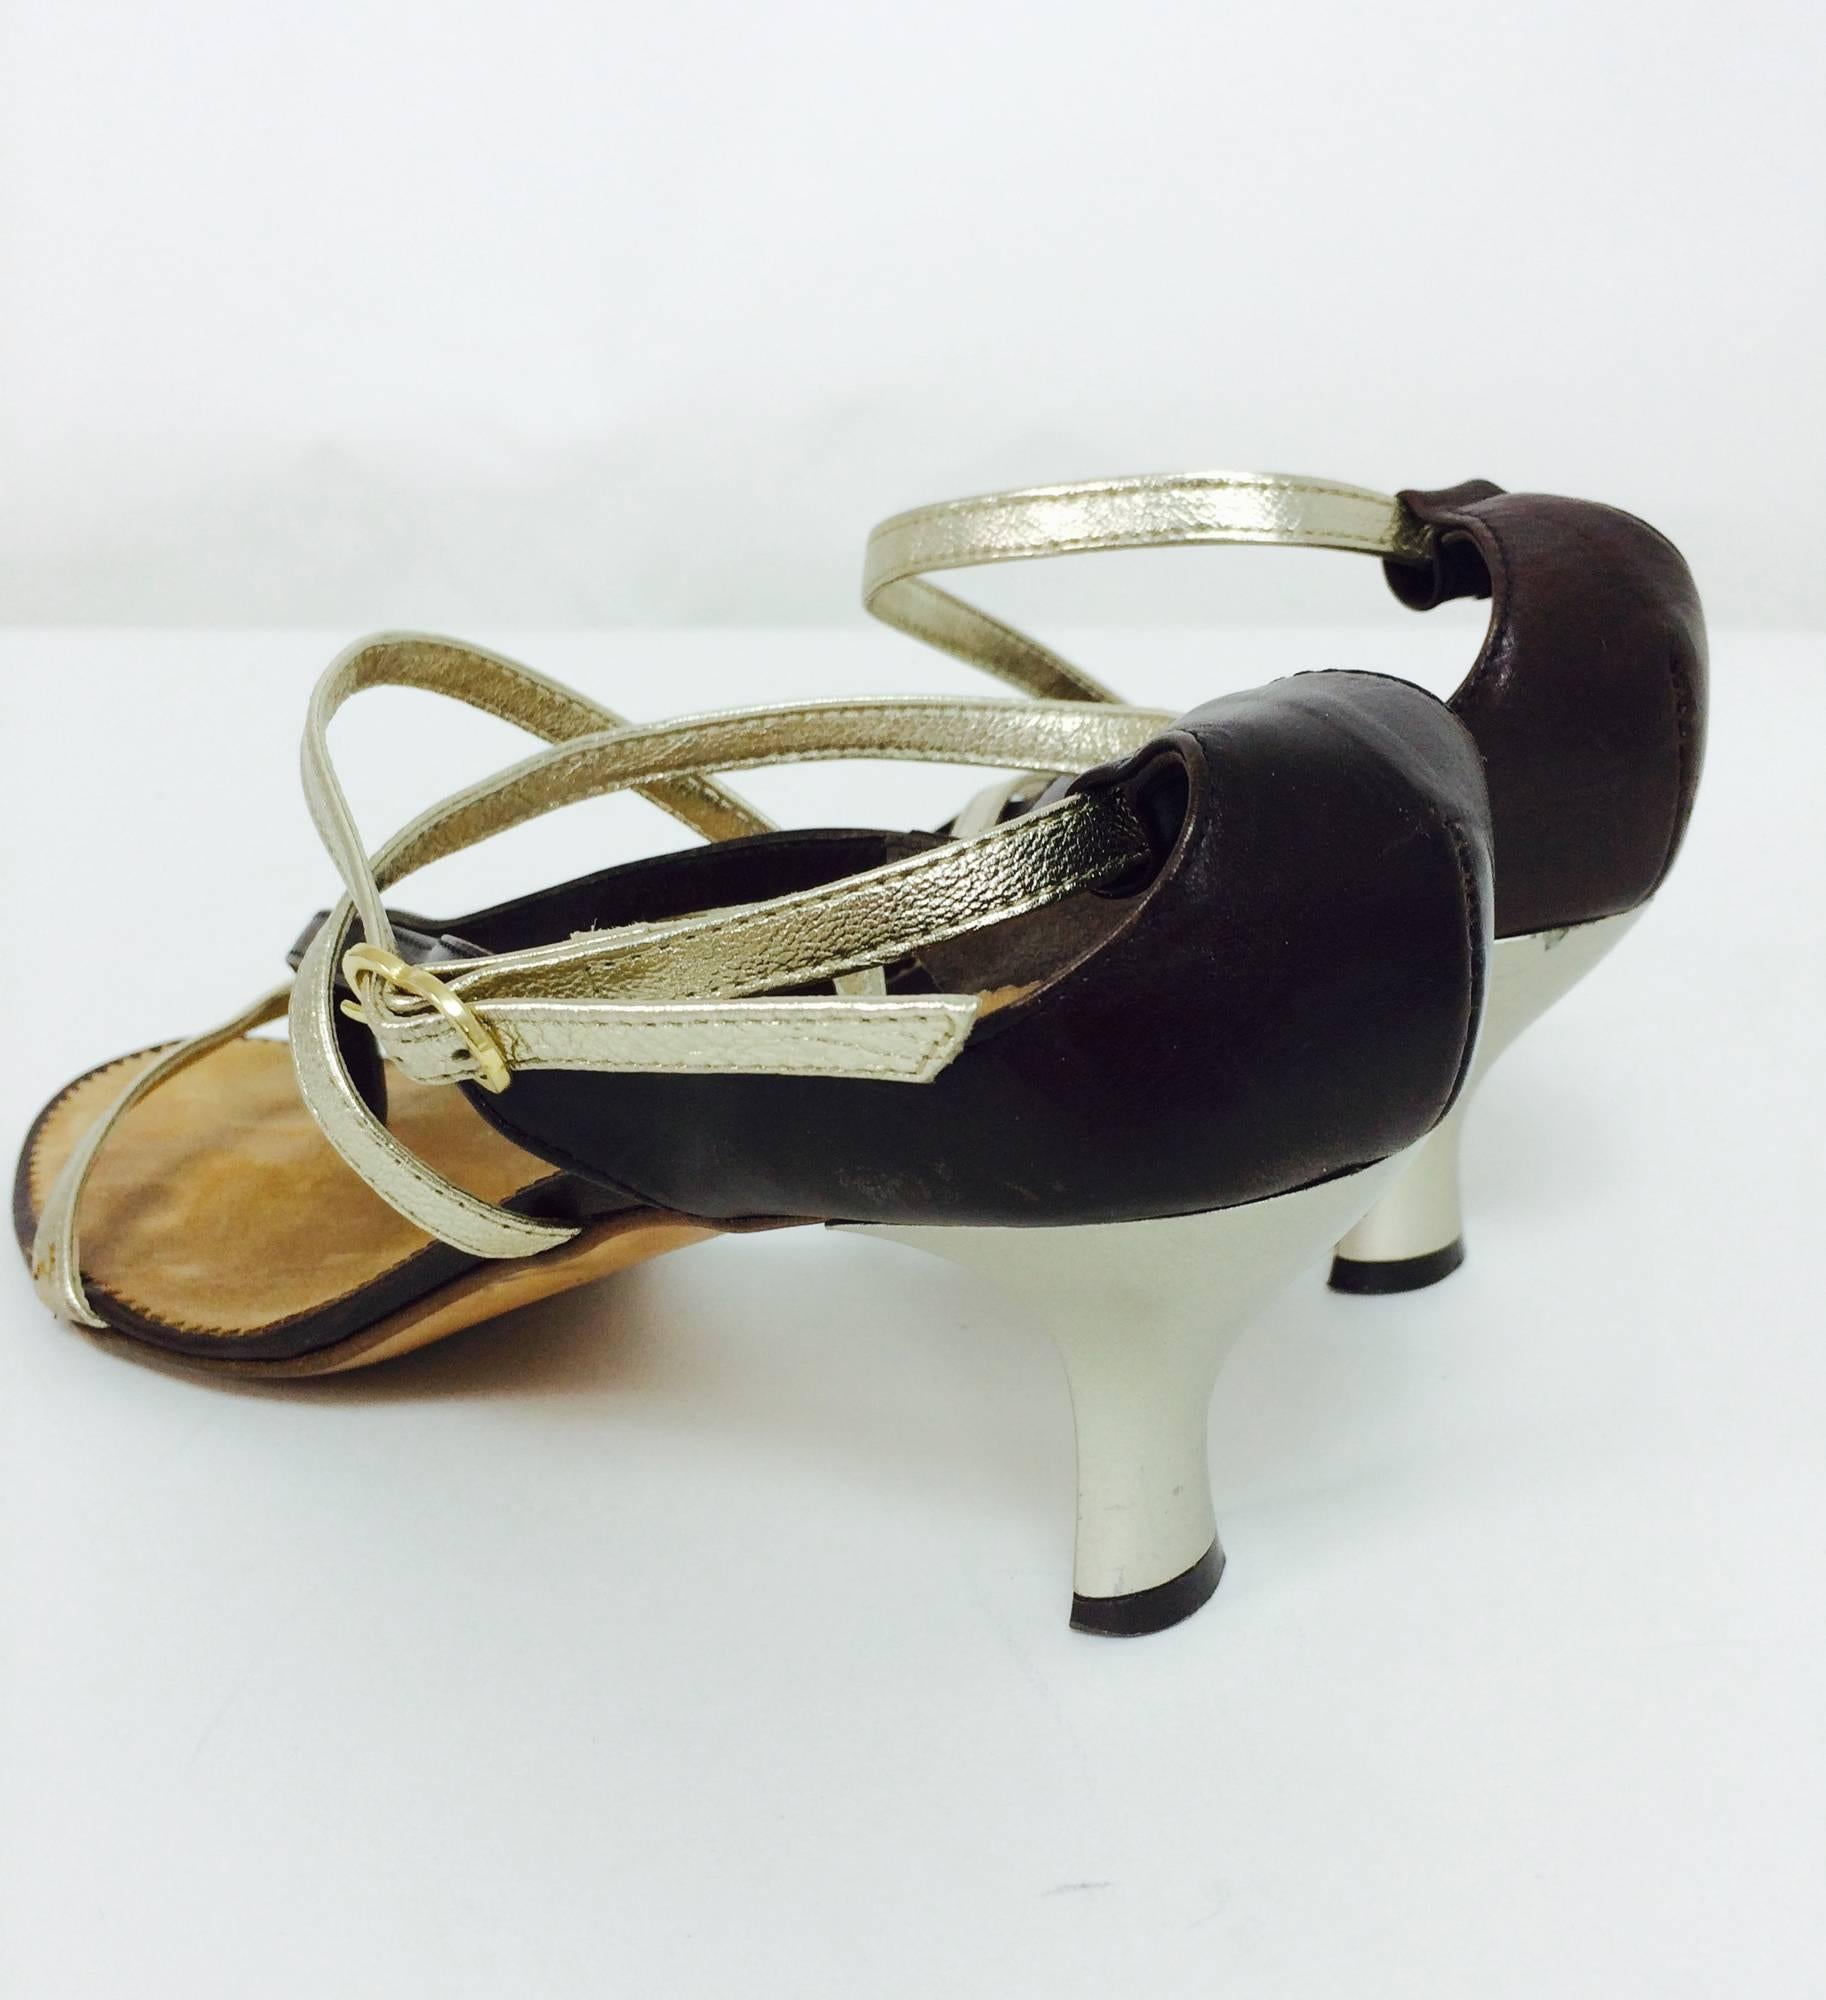 Herzel De Bach Rome dark chocolate brown, silver & gold leather kitten heel sandal 37...Beautifully made silver kitten heel sandals with straps in dark brown and gold leather...Thong style with wrap buckle straps...The foot bed is lined in soft tan